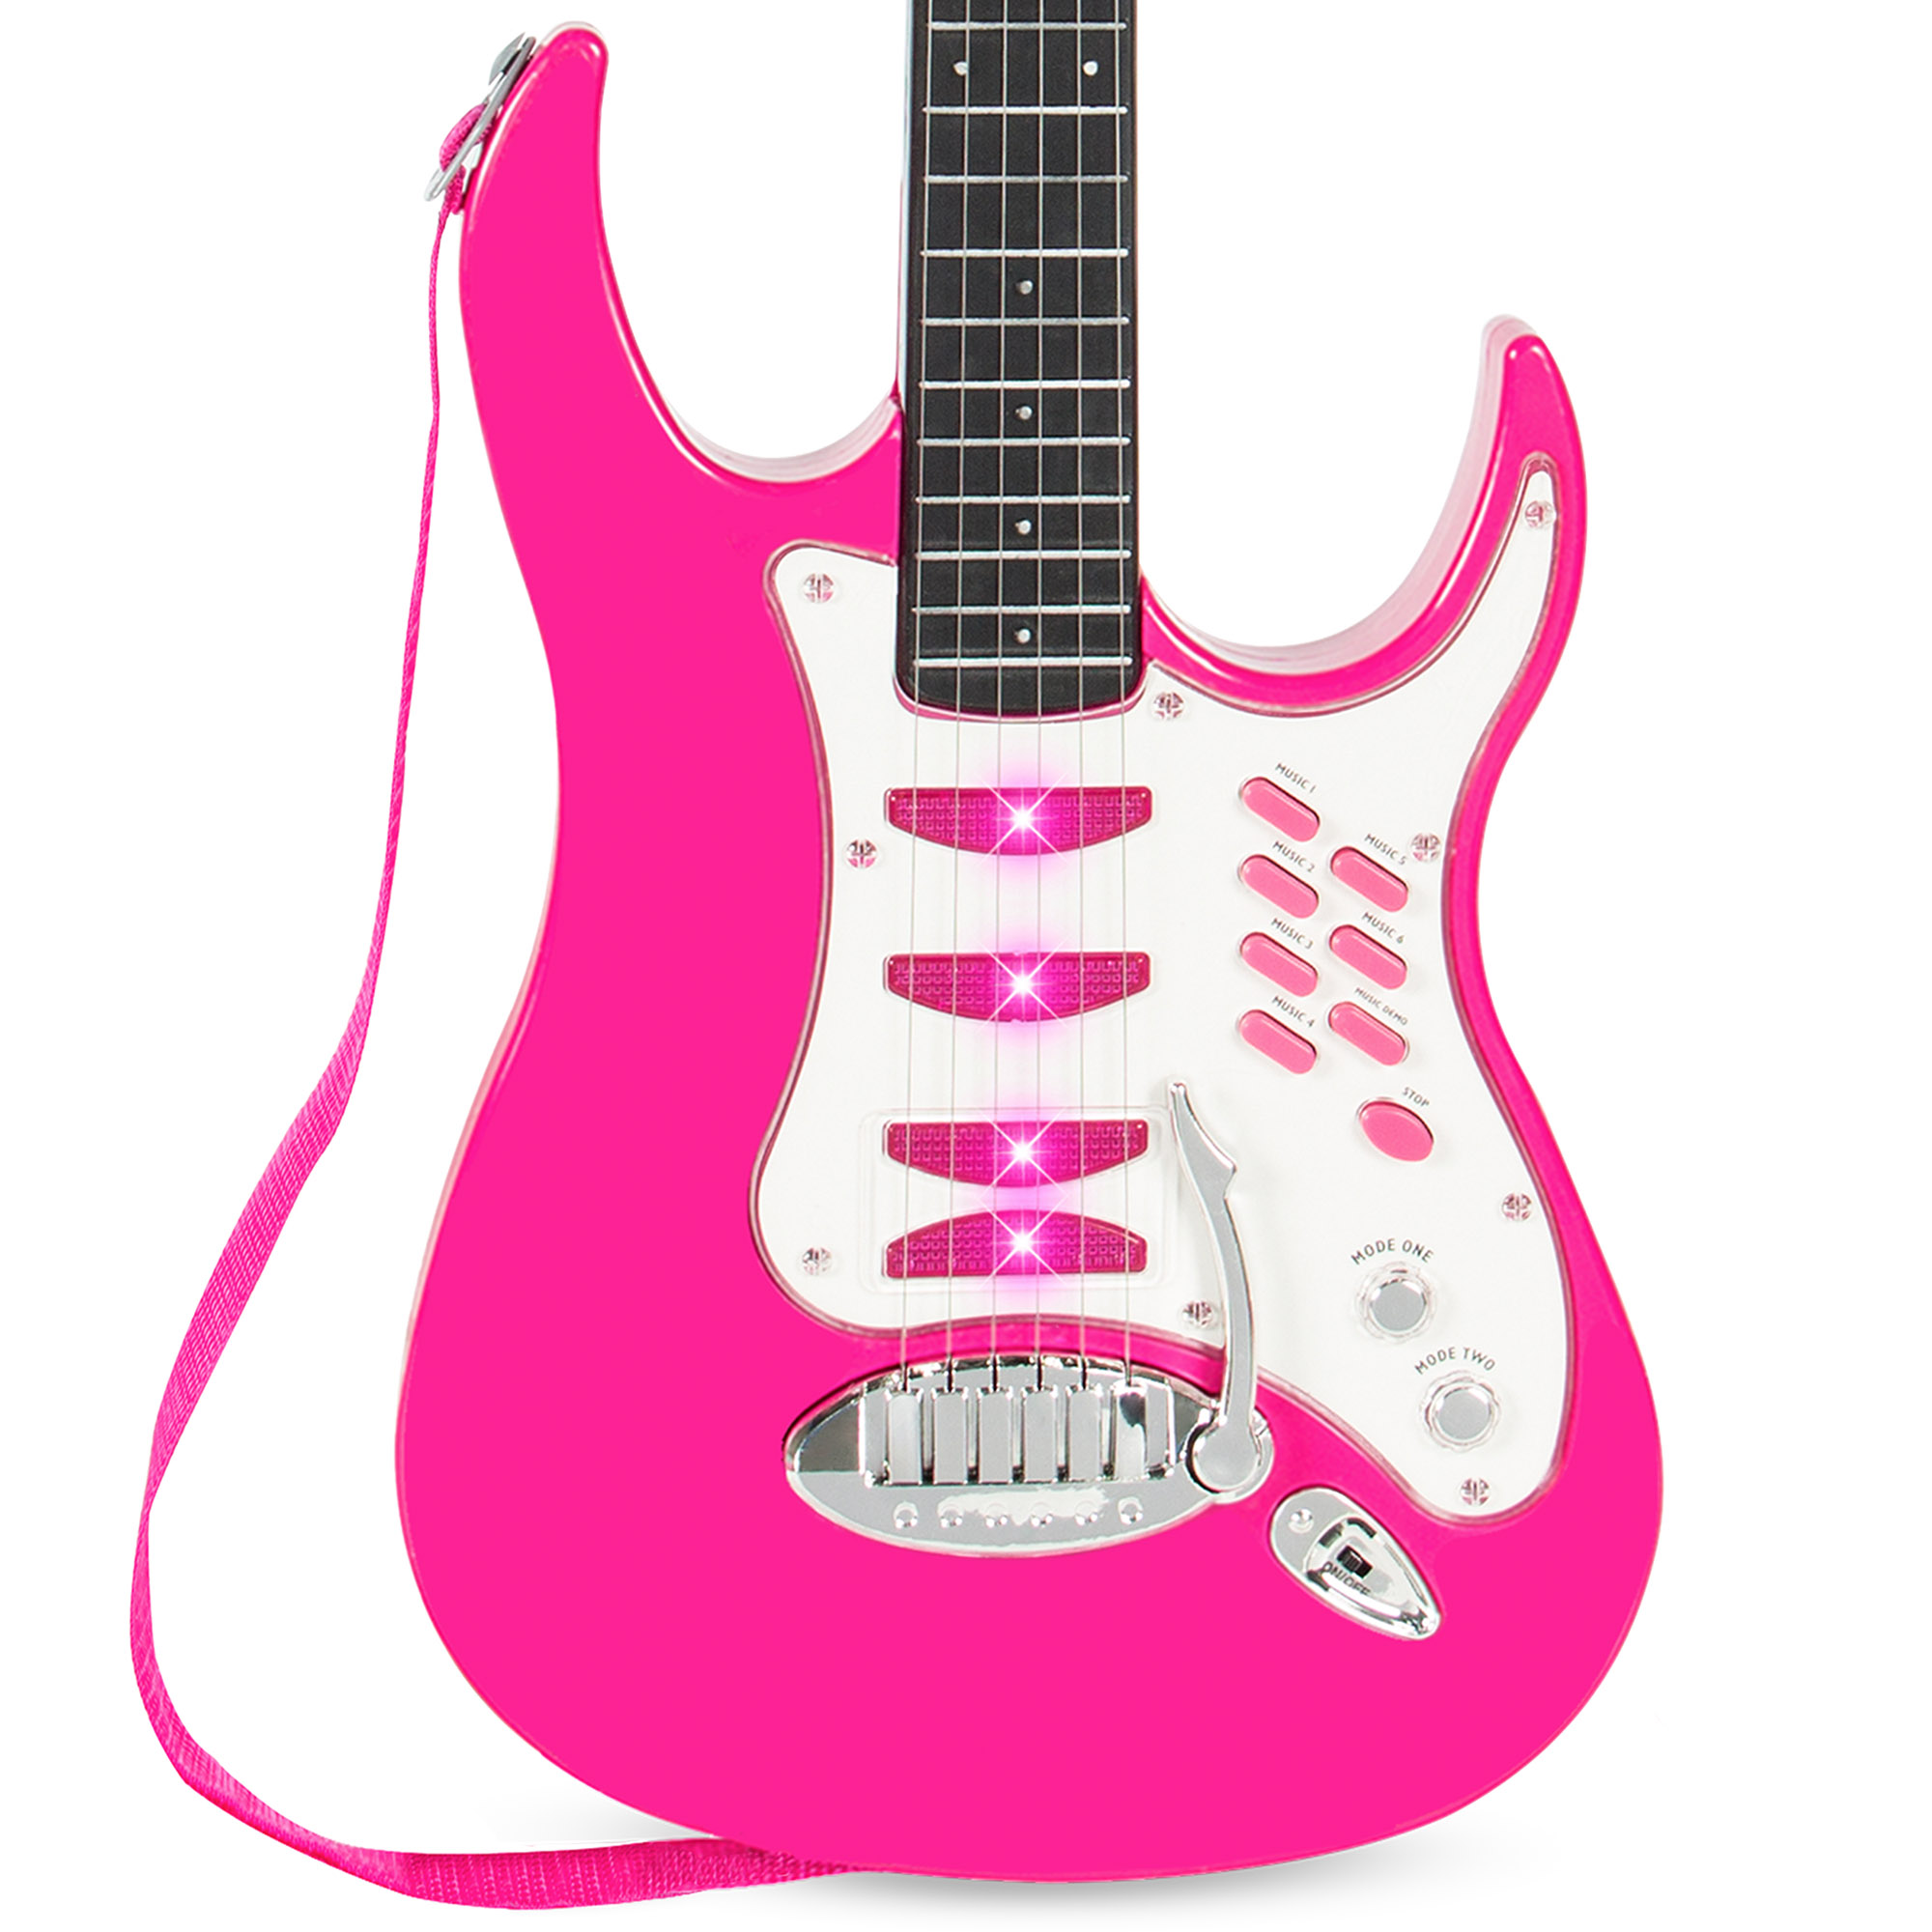 Best Choice Products Kids Electric Musical Guitar Toy Play Set w/ 6 Demo Songs, Whammy Bar, Microphone, Amp, AUX - Pink - image 4 of 7